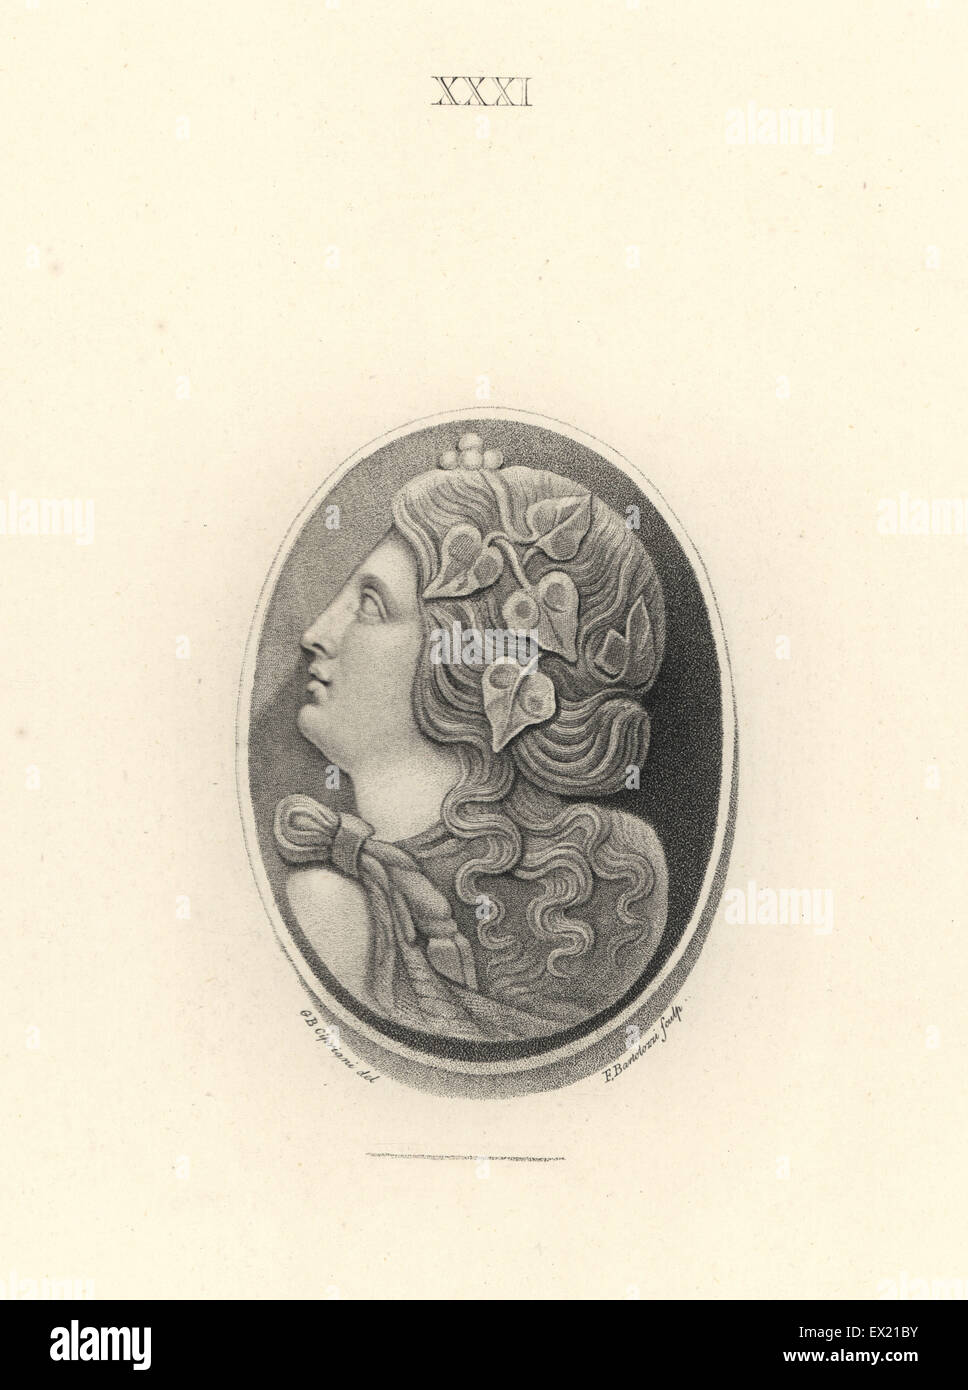 Bacchante, follower of Bacchus, Roman god of wine, with vineleaves in her hair. Copperplate engraving by Francesco Bartolozzi after a design by Giovanni Battista Cipriani from 108 Plates of Antique Gems, 1860. The gems were from the Duke of Marlborough's collection. Stock Photo